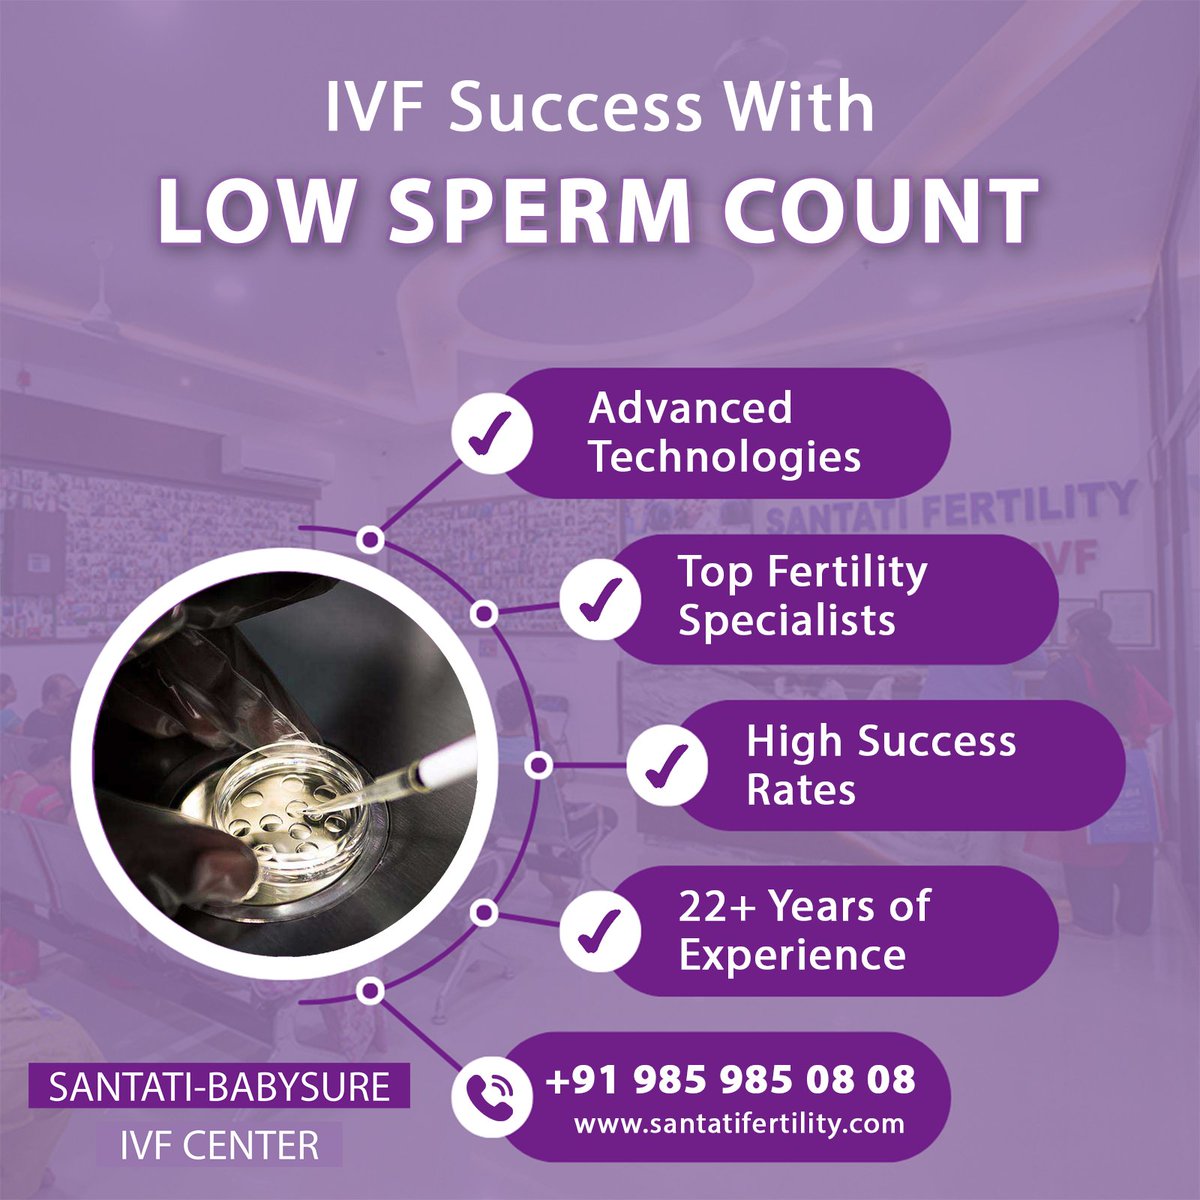 IVF Success With Low Sperm Count
Book your appointment today - bit.ly/3fIDbz1
or Call us on +91 985 985 08 08

#IVFClinic #IVFTreatment #FertilityTreatment #IVFSpecialist #IVFDoctors #ivfsuccess